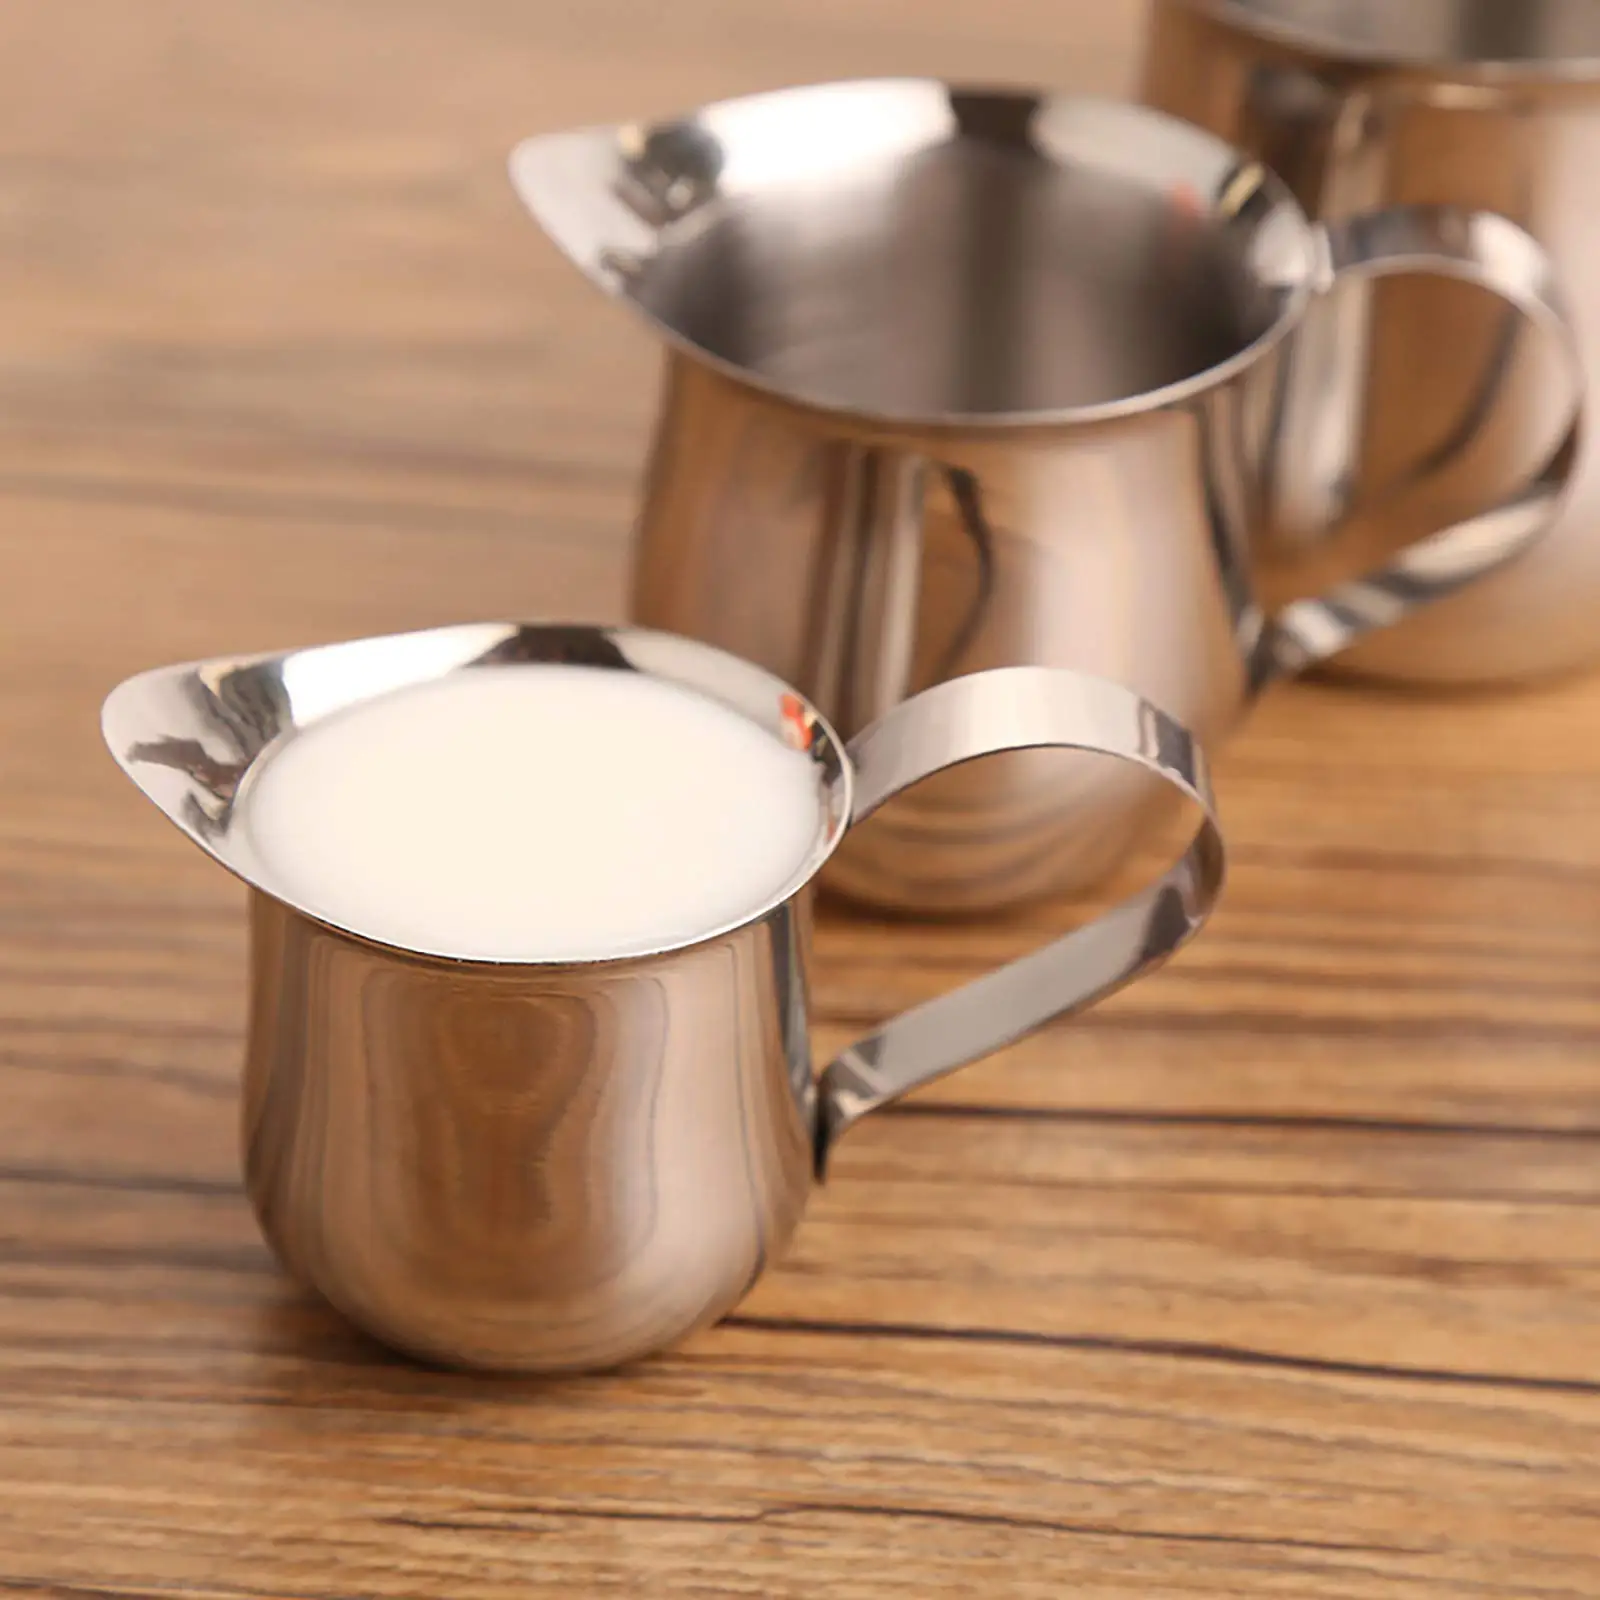 https://ae01.alicdn.com/kf/S8c10c9958b48454eb21acf71fe3e7725M/Coffee-Milk-Frothing-Pitcher-Cup-Stainless-Steel-Espresso-Creamer-Pitchers-Ounce-Measuring-Cup-with-Pouring-Spout.jpg